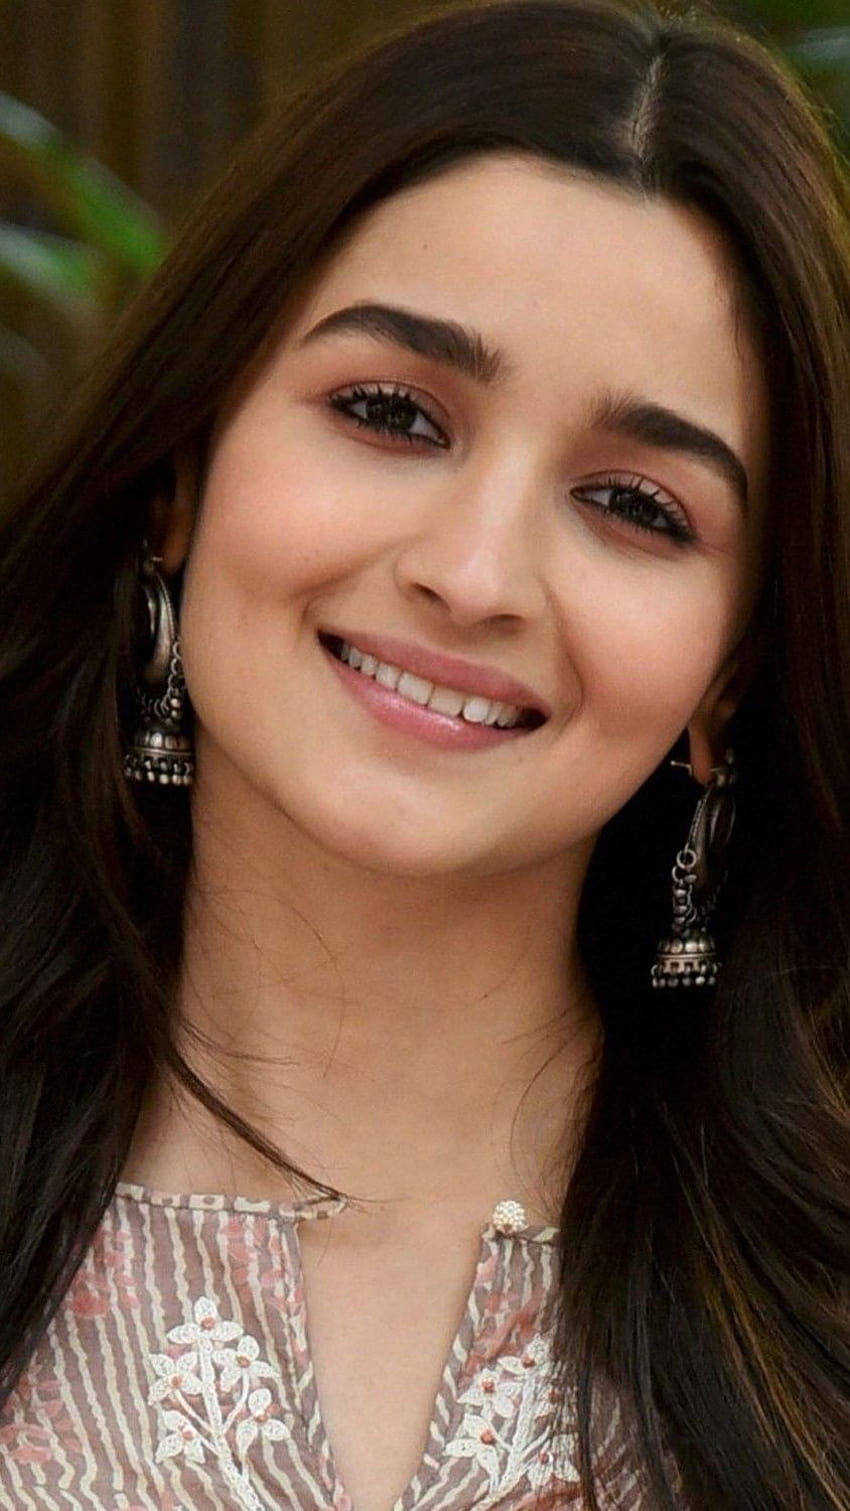 Alia Bhatt very cute smiling face new mobile, cute actress for mobile HD phone wallpaper